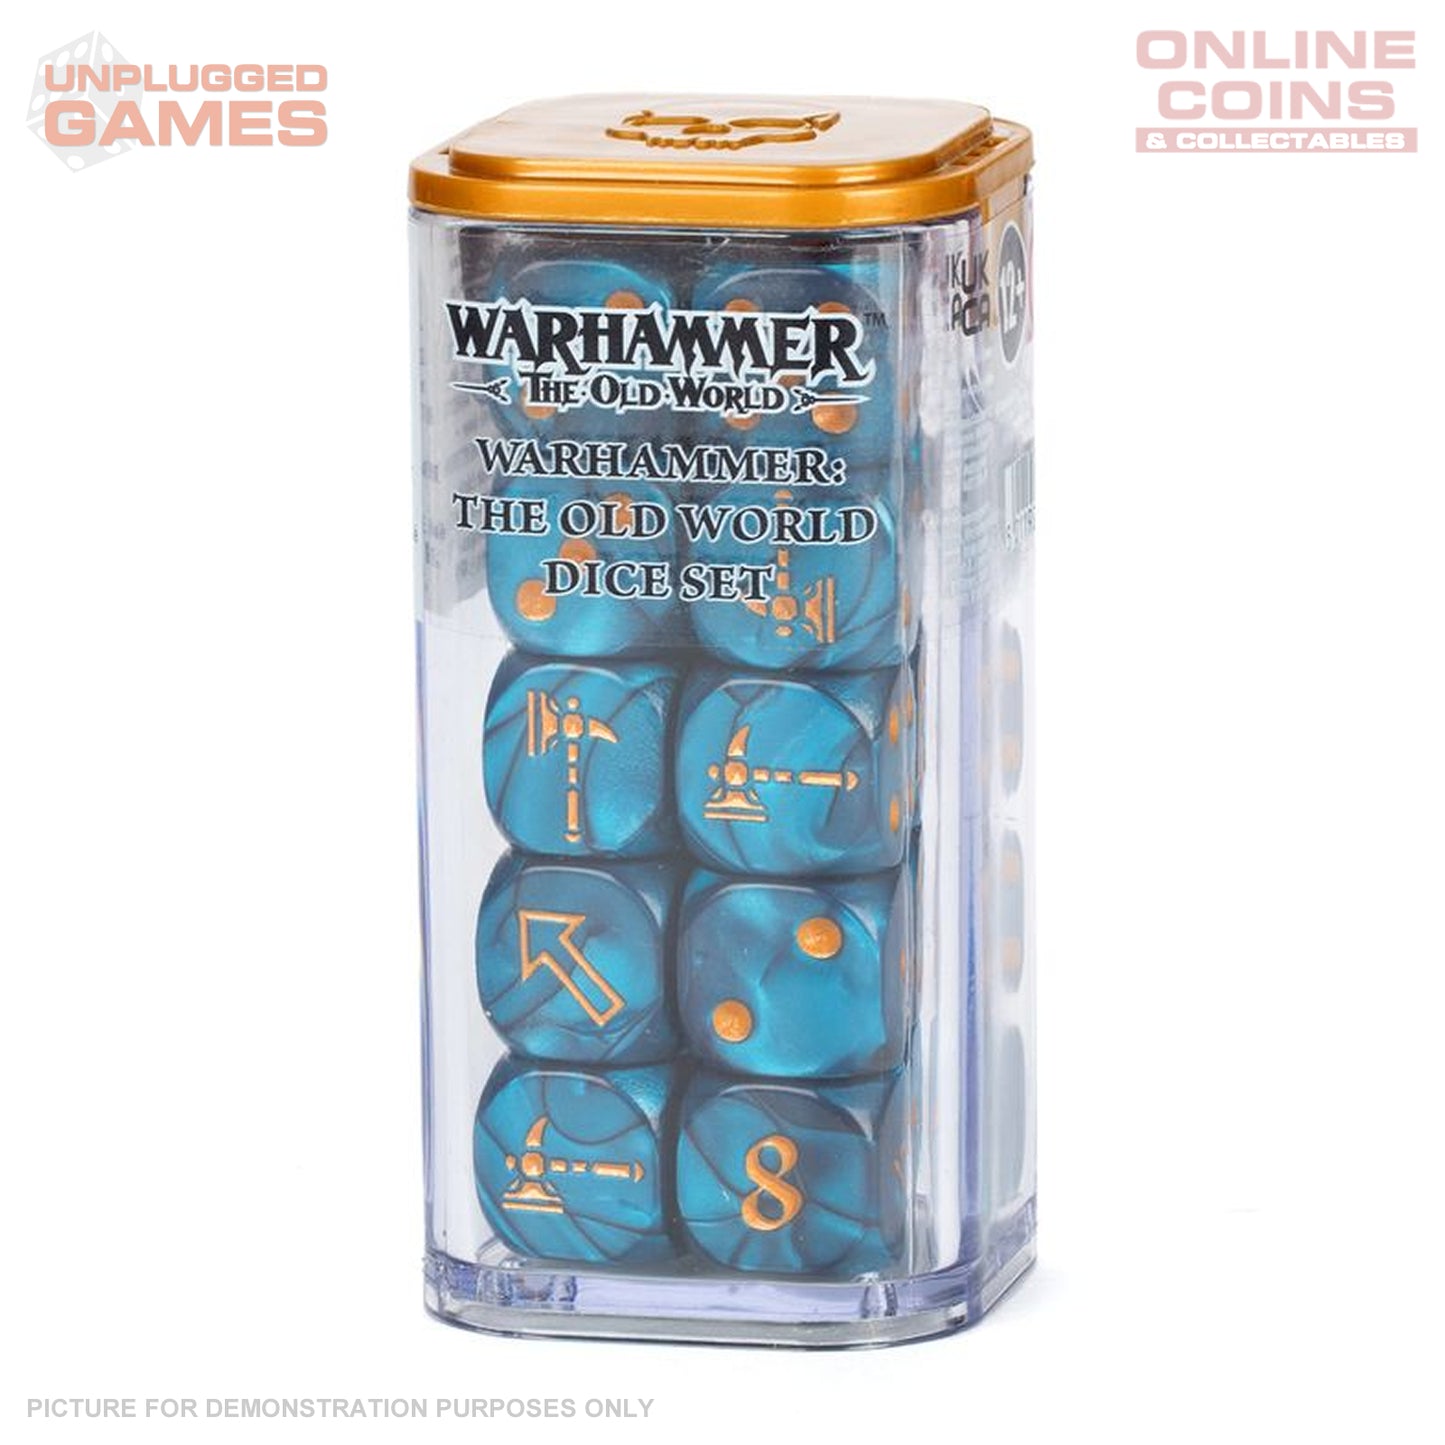 The Old World - The Old World Dice Set